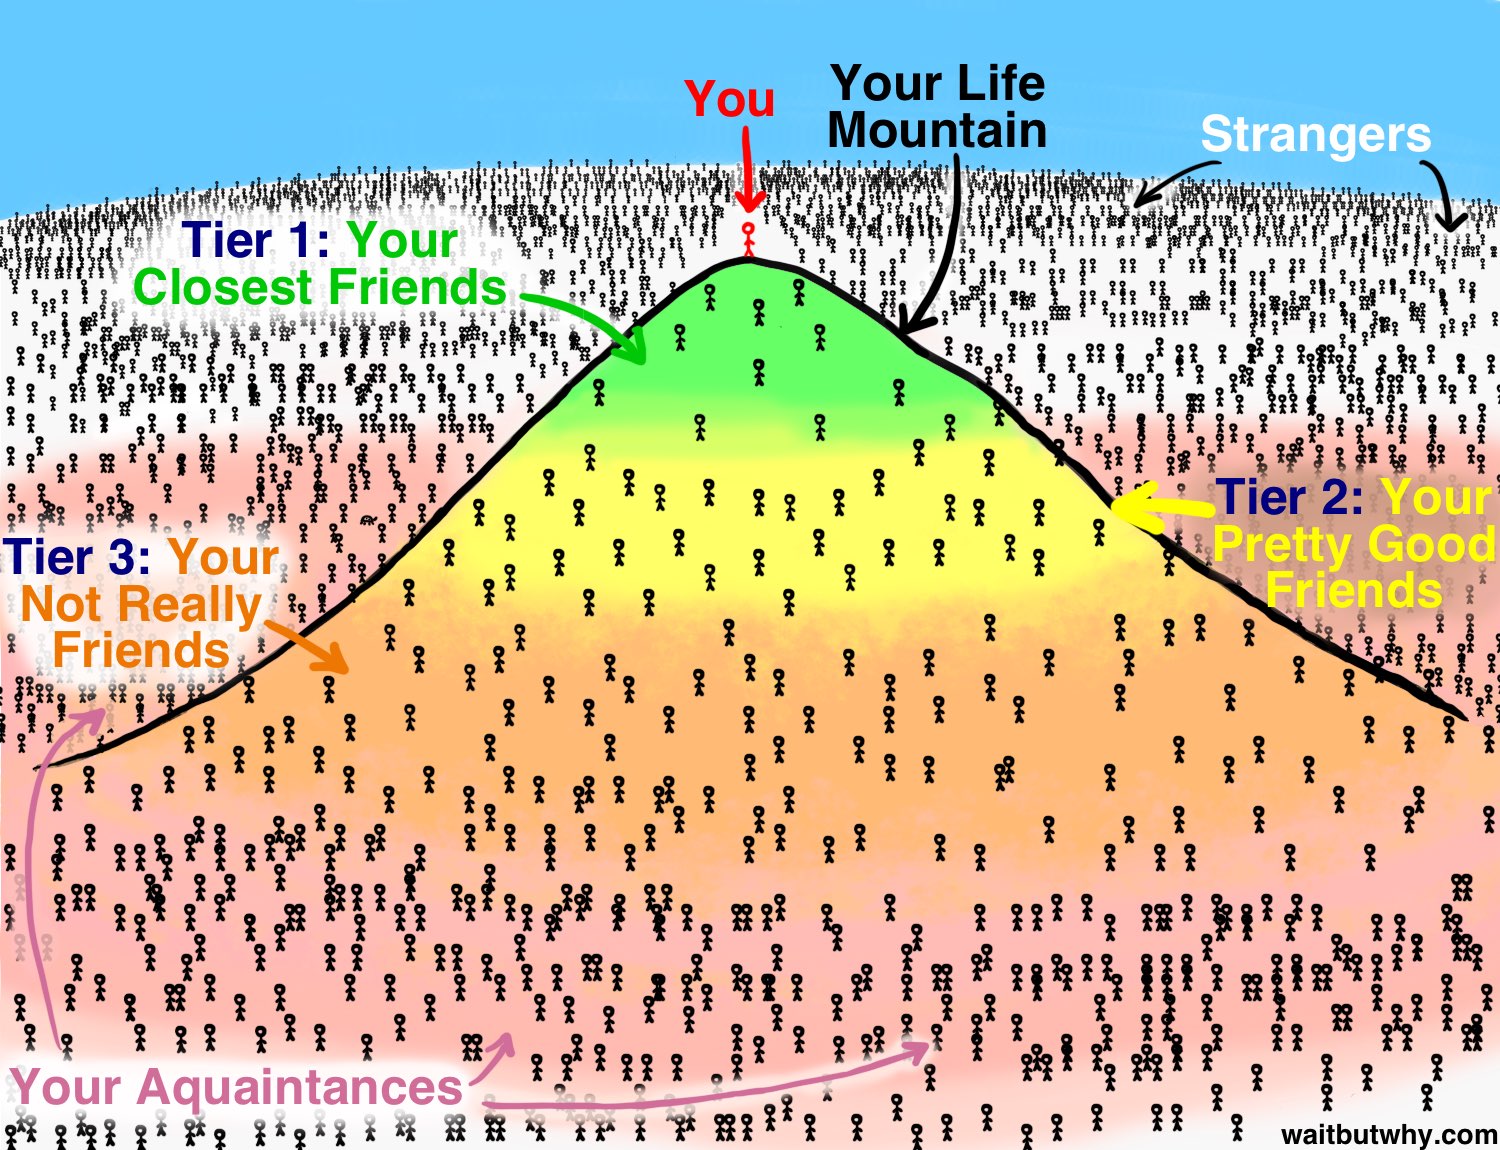 Tiers of friendship depicted by number of people on a mountain with you at the top.